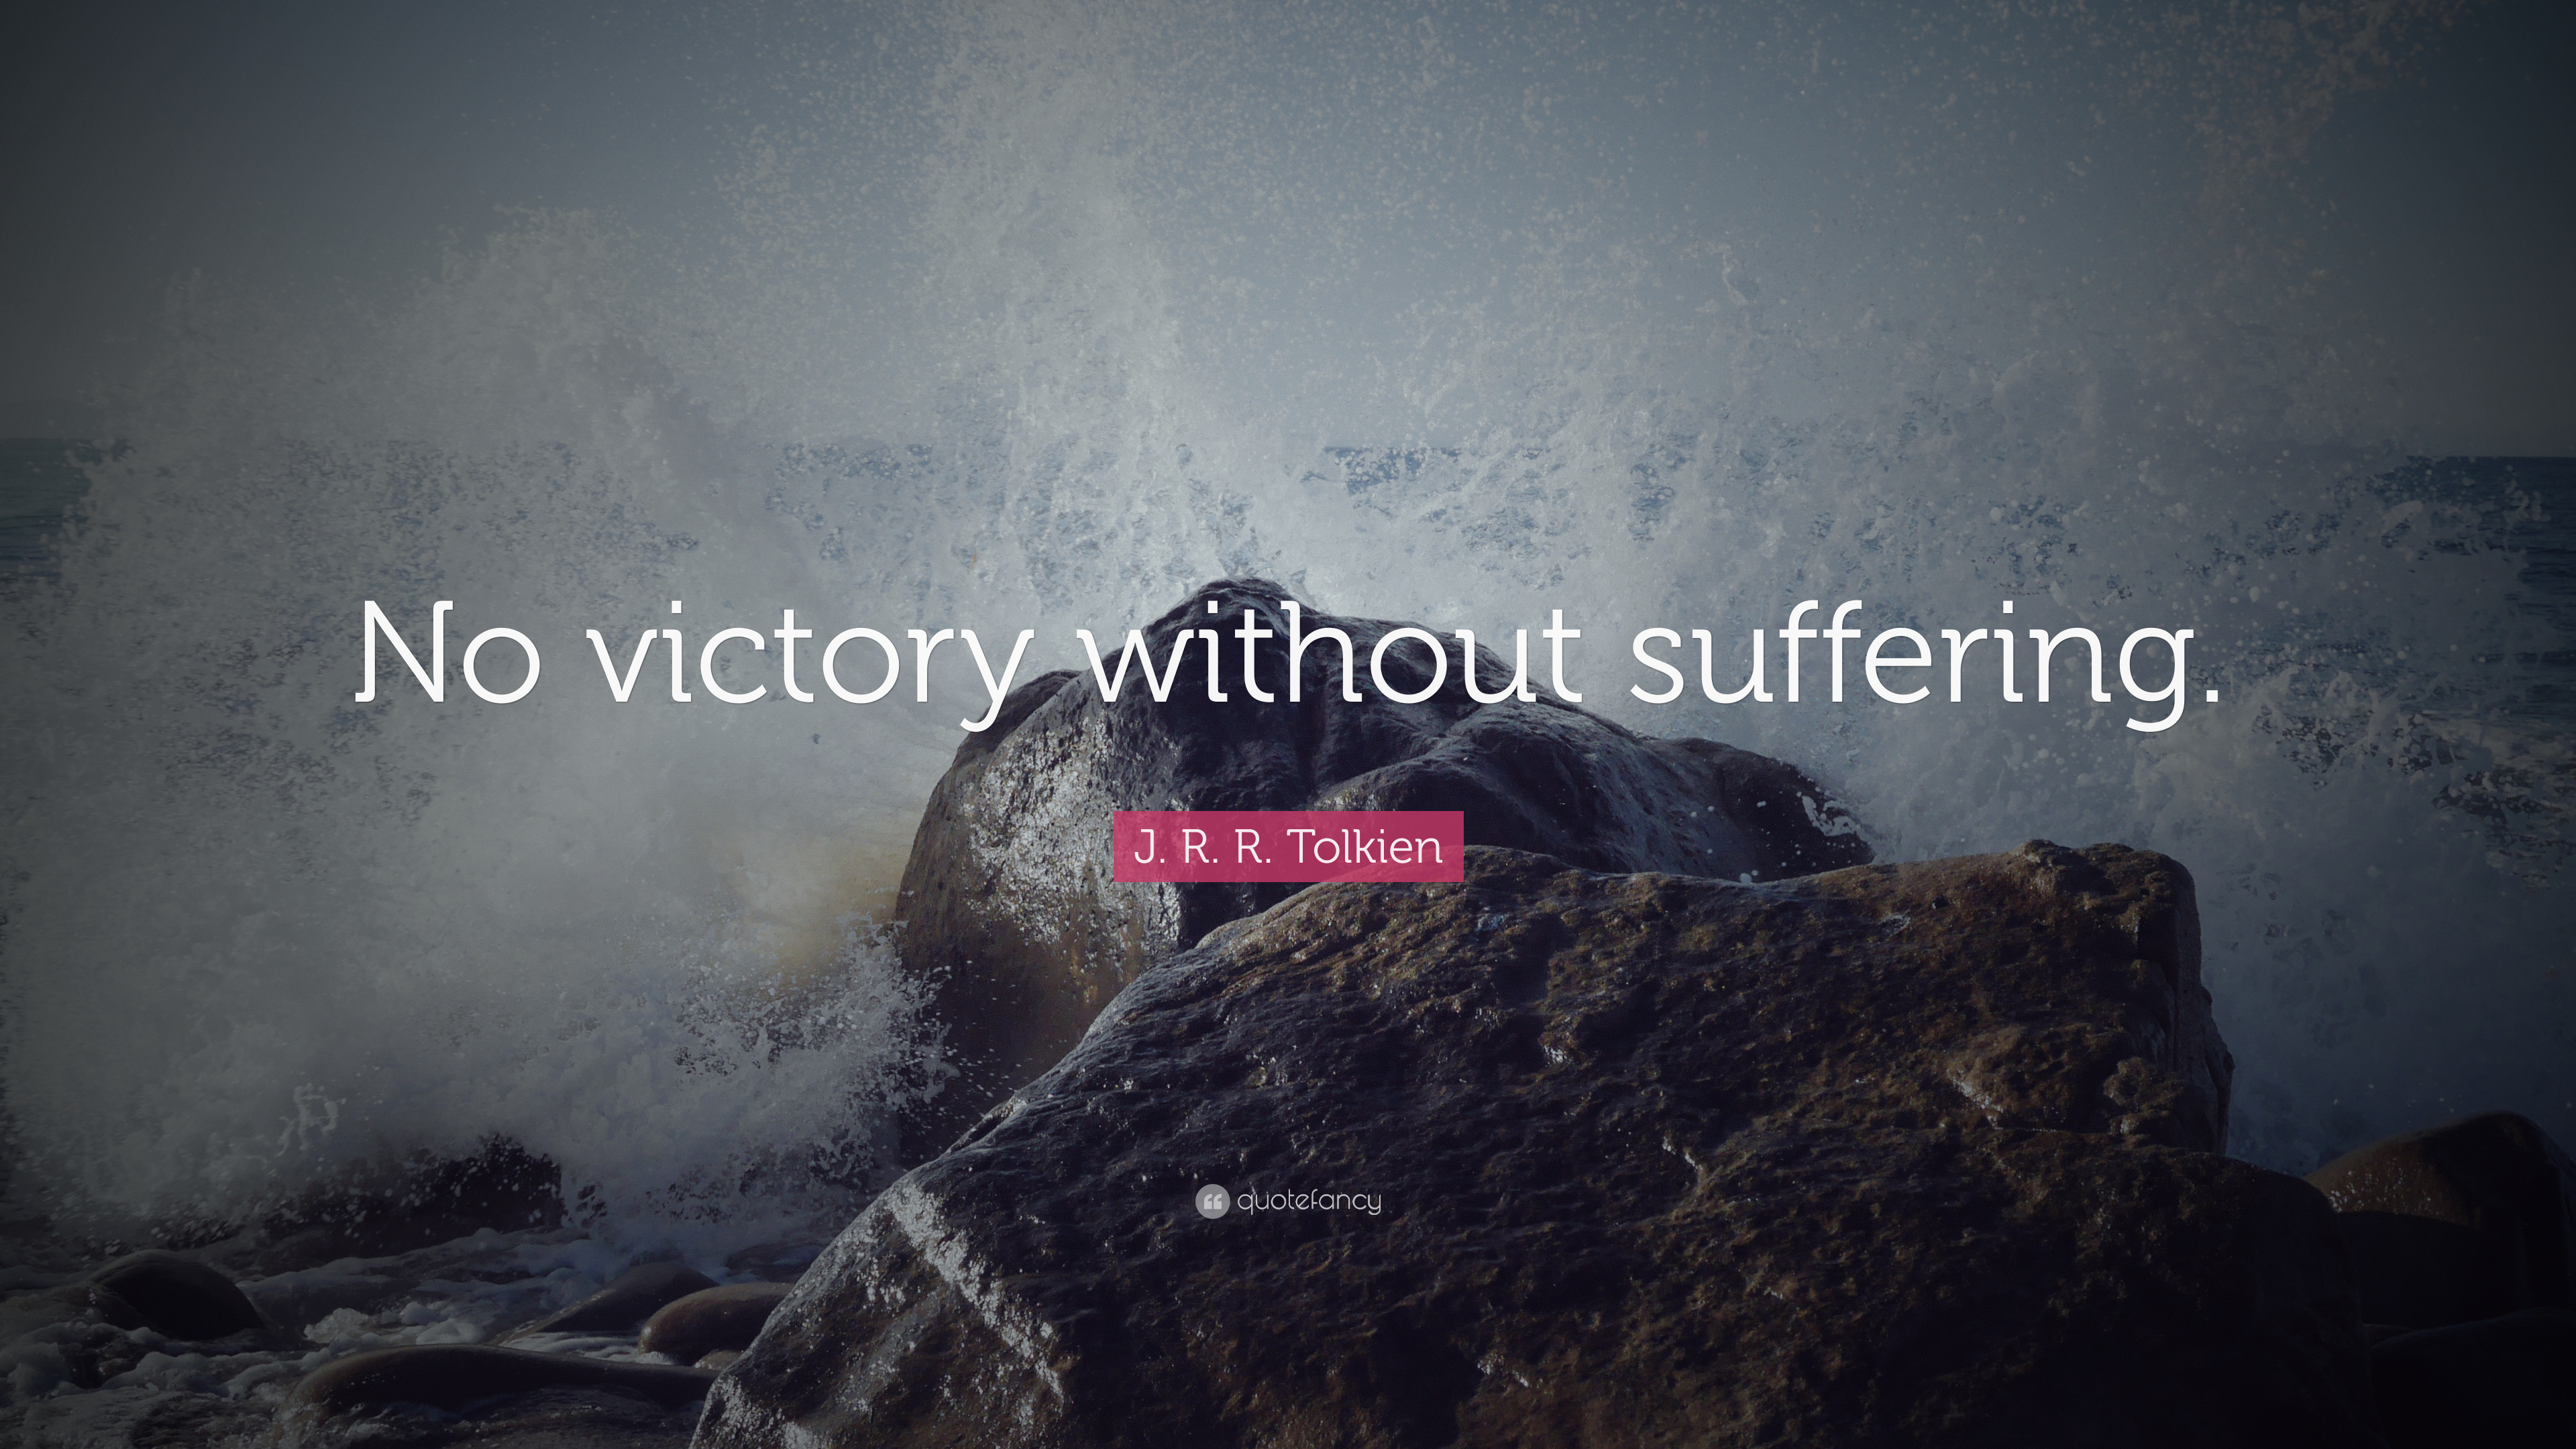 no victory without suffering. j.r.r. tolkien